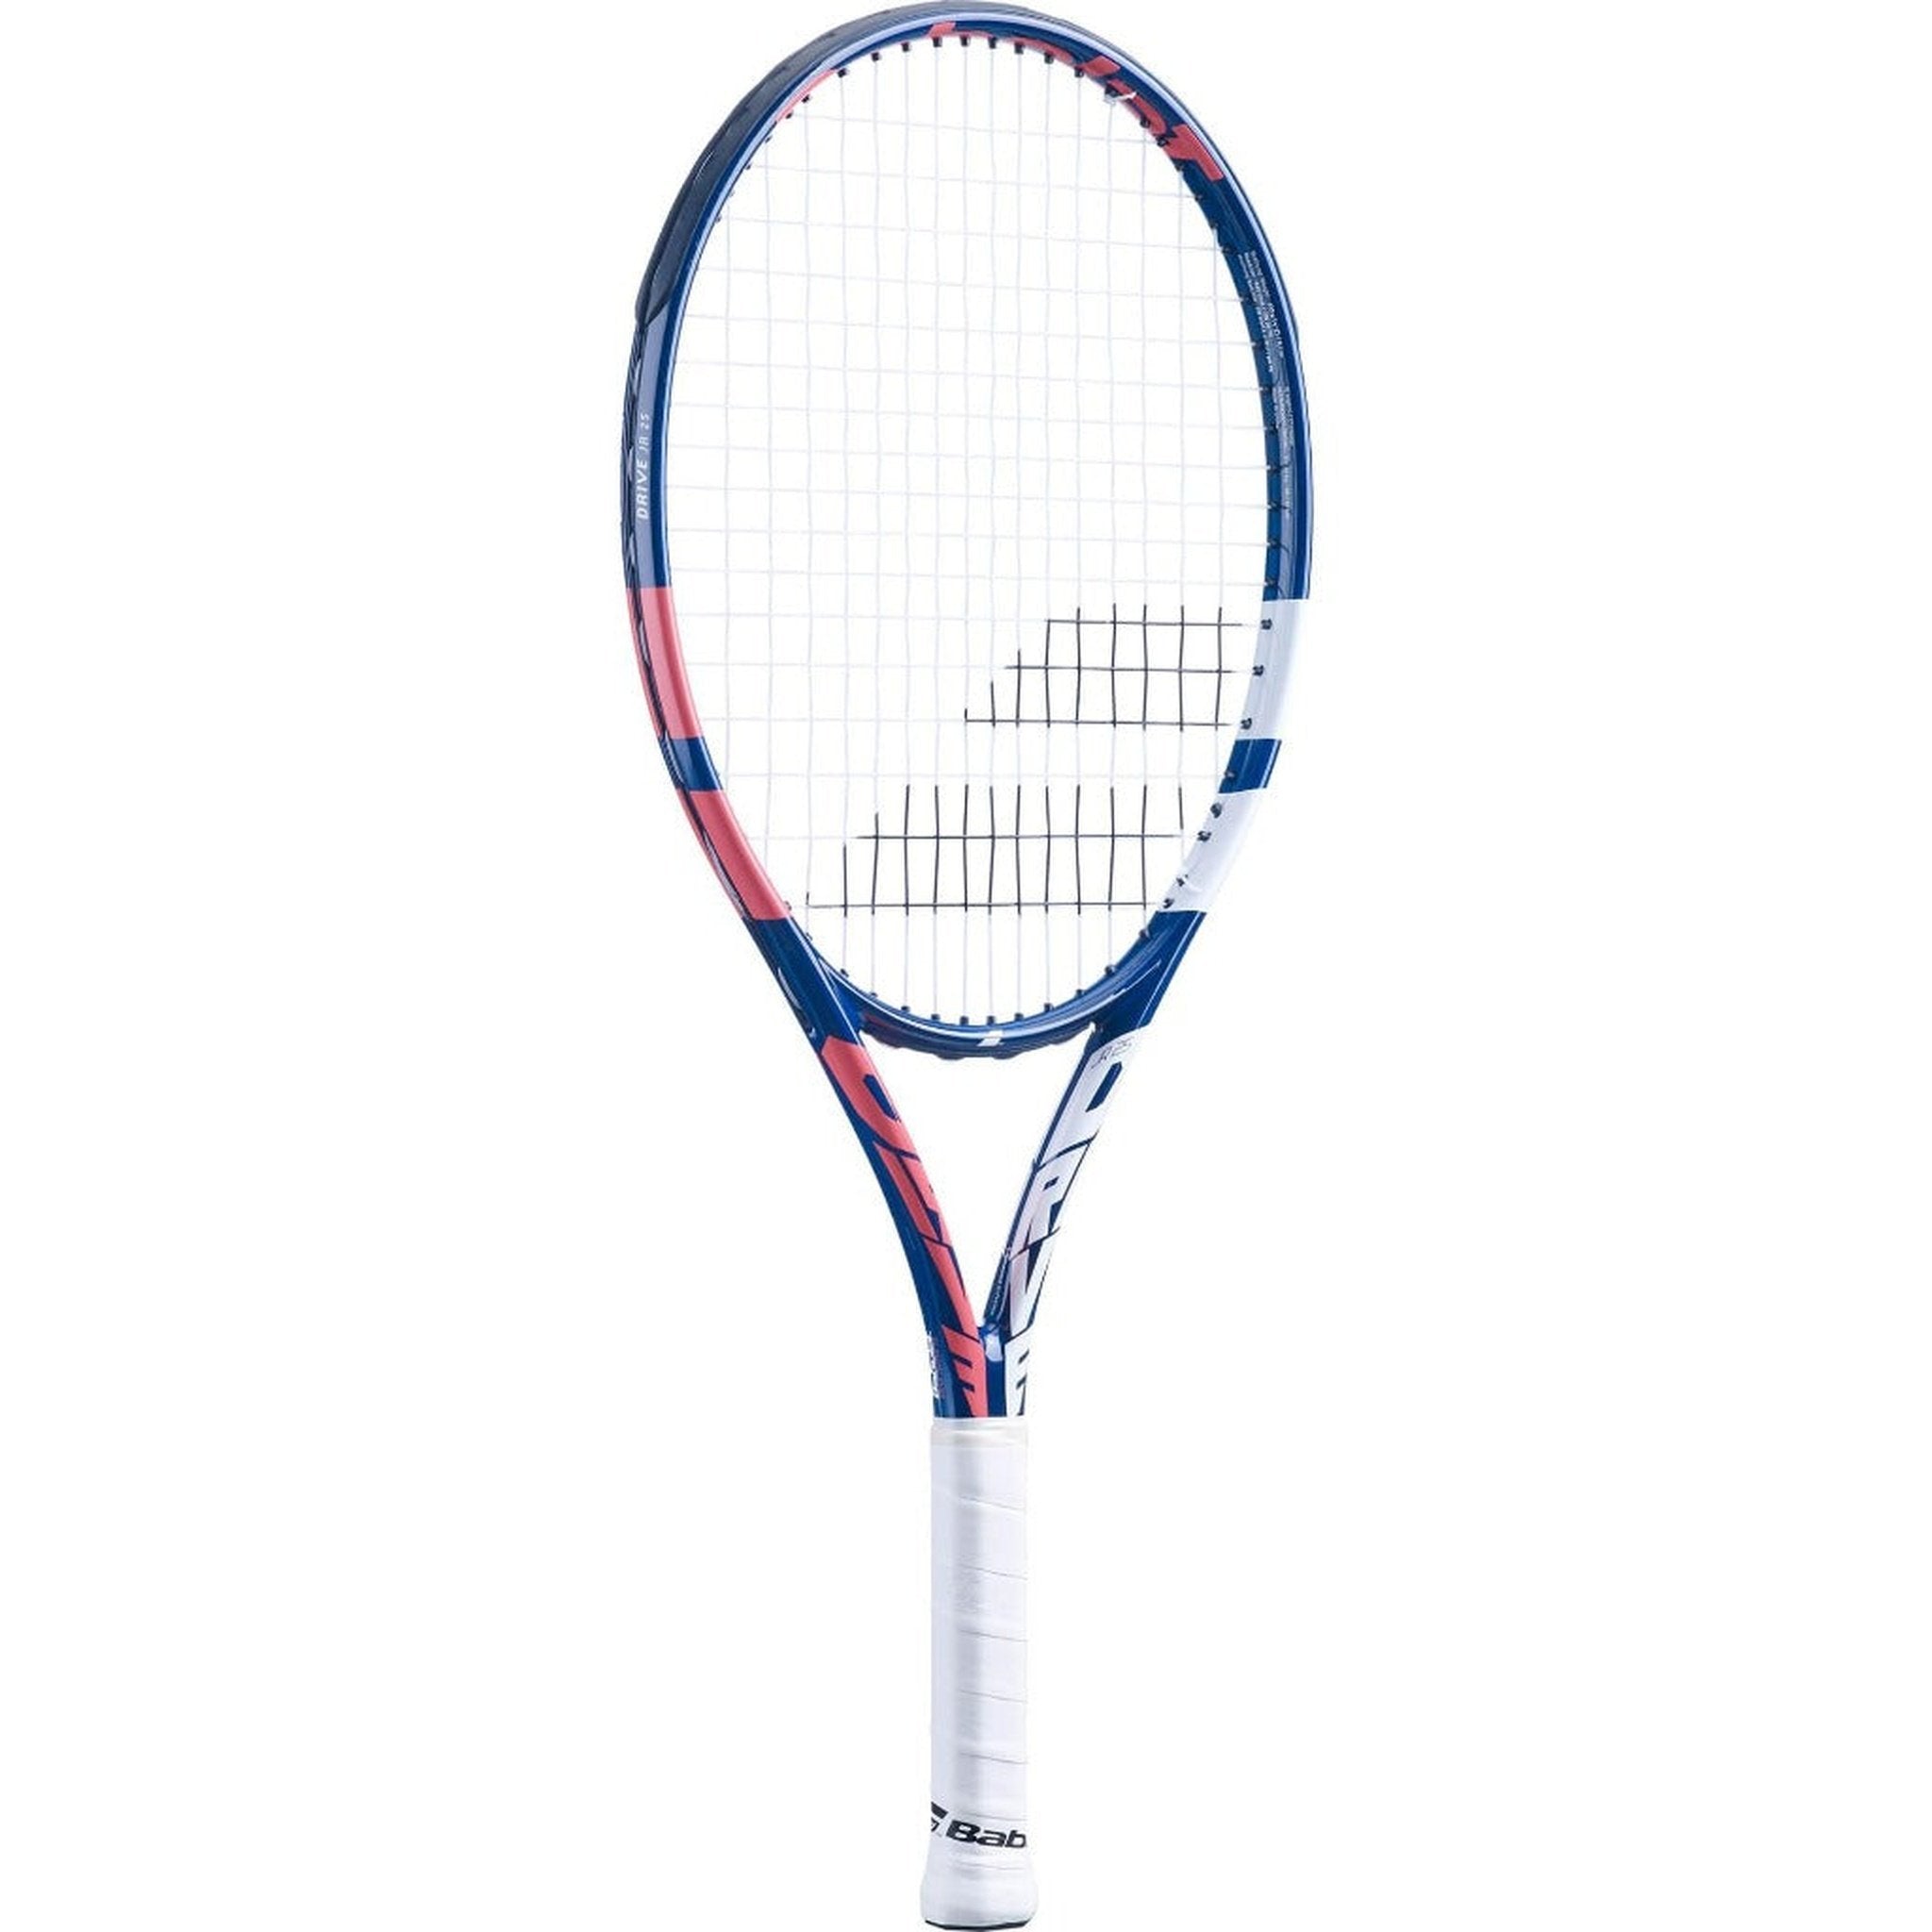 Babolat Drive 25 Inch Junior Tennis Racket - Coral/Blue 2021